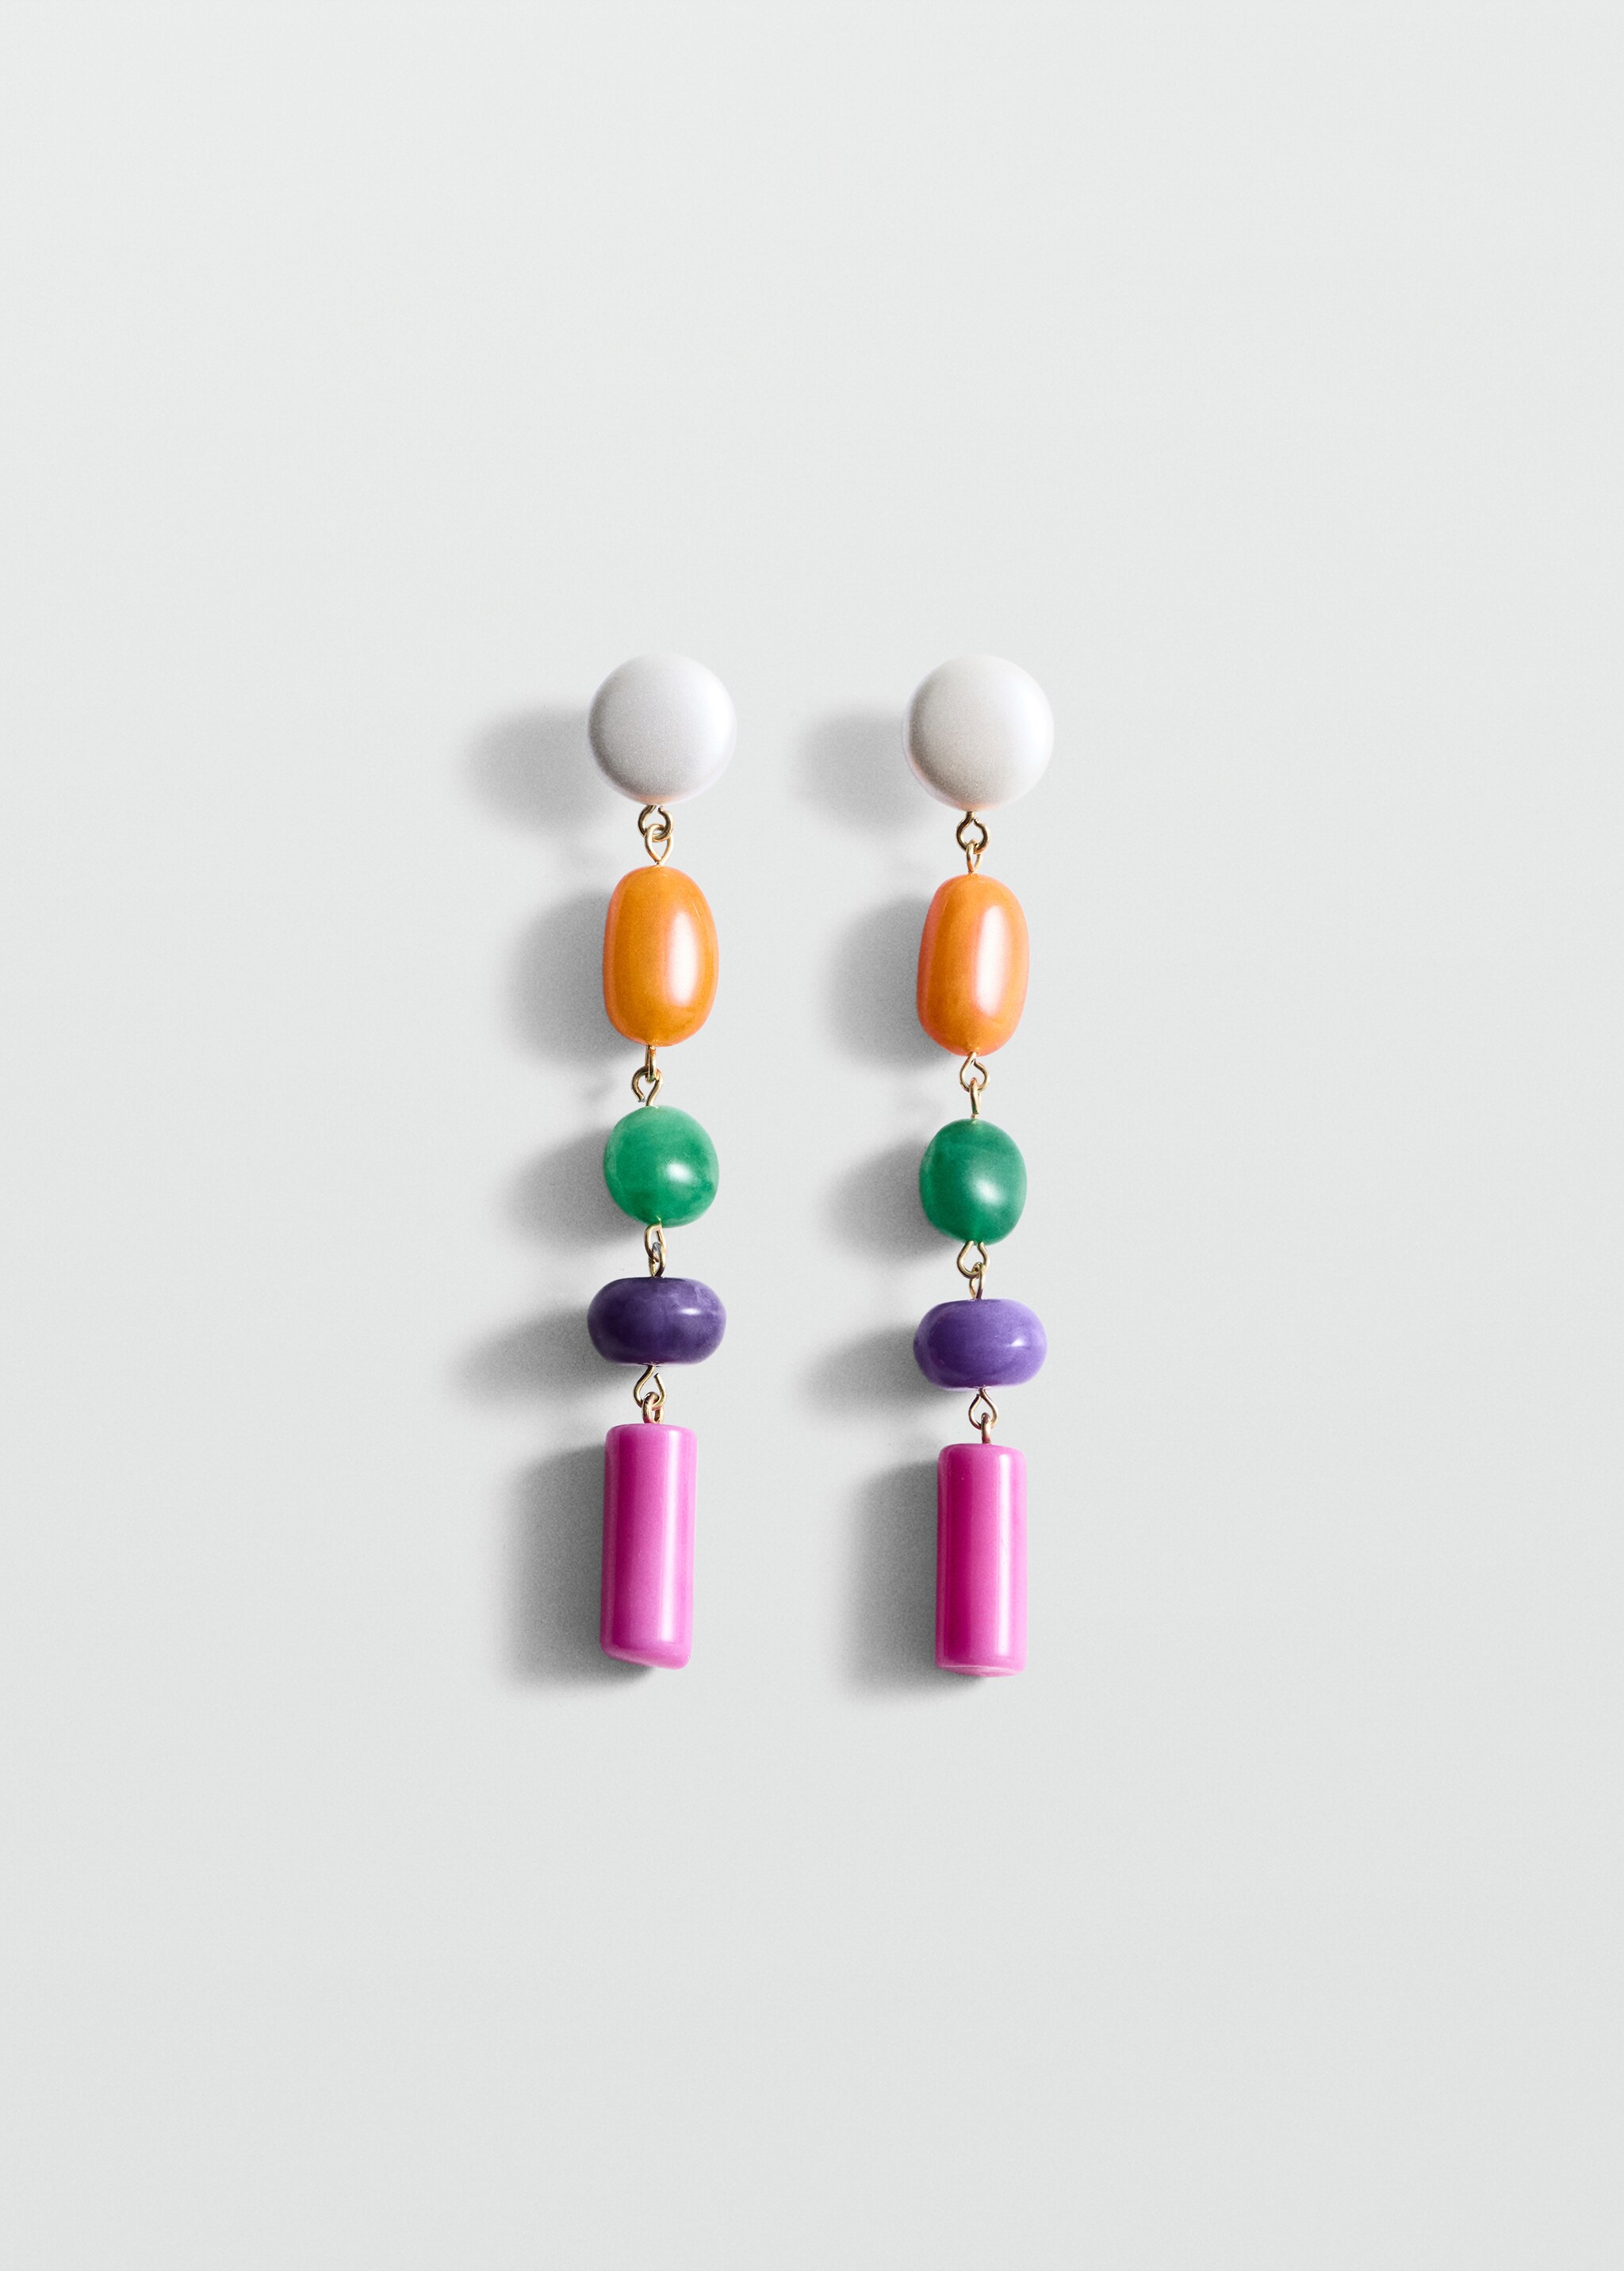 Beaded pendant earrings - Article without model